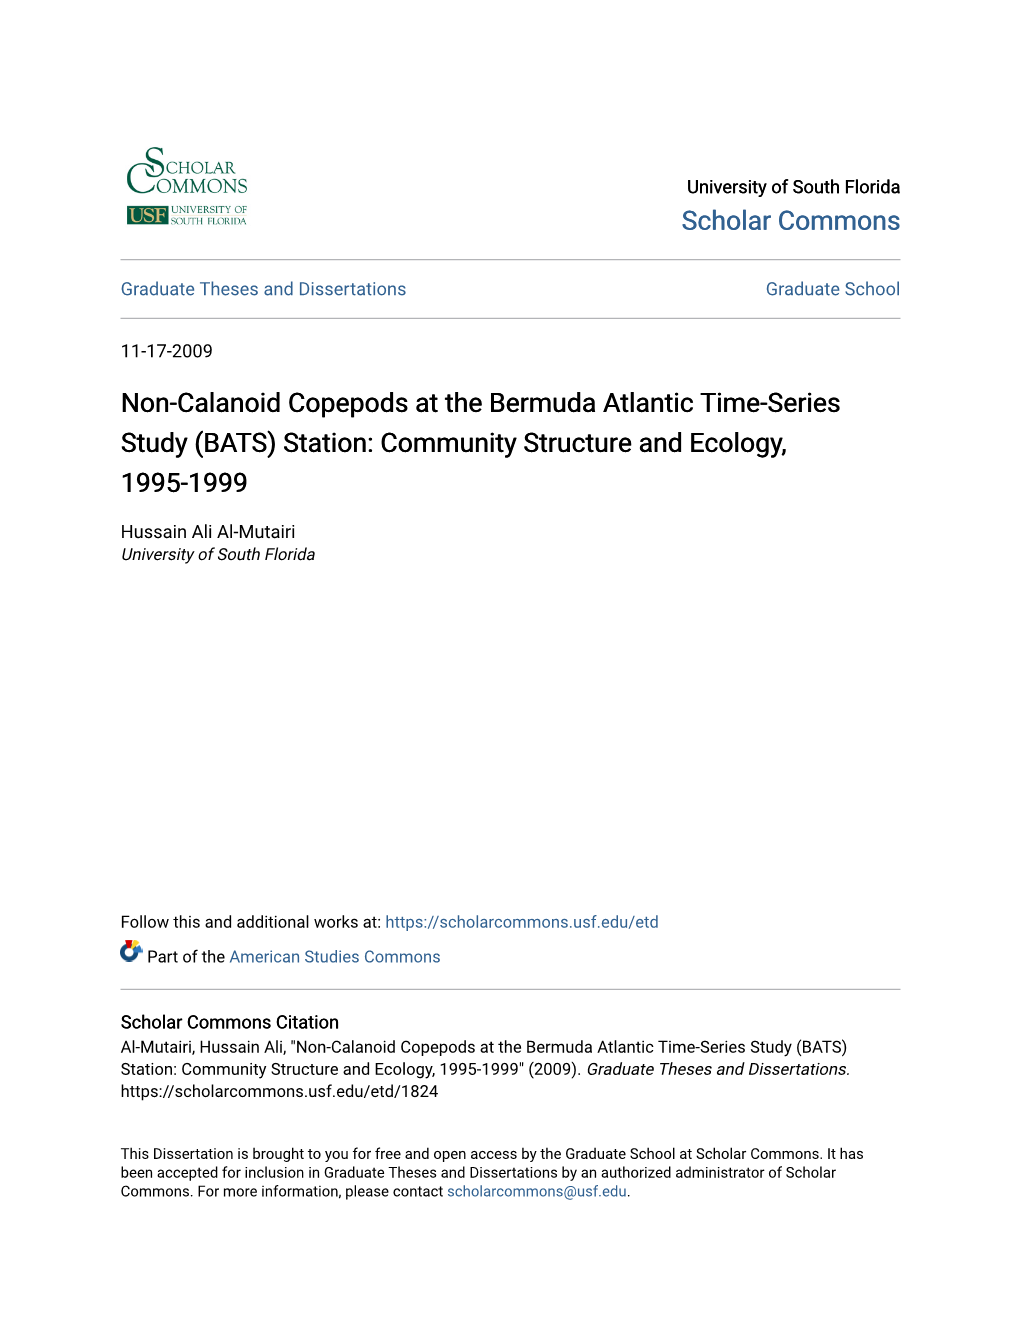 Non-Calanoid Copepods at the Bermuda Atlantic Time-Series Study (BATS) Station: Community Structure and Ecology, 1995-1999